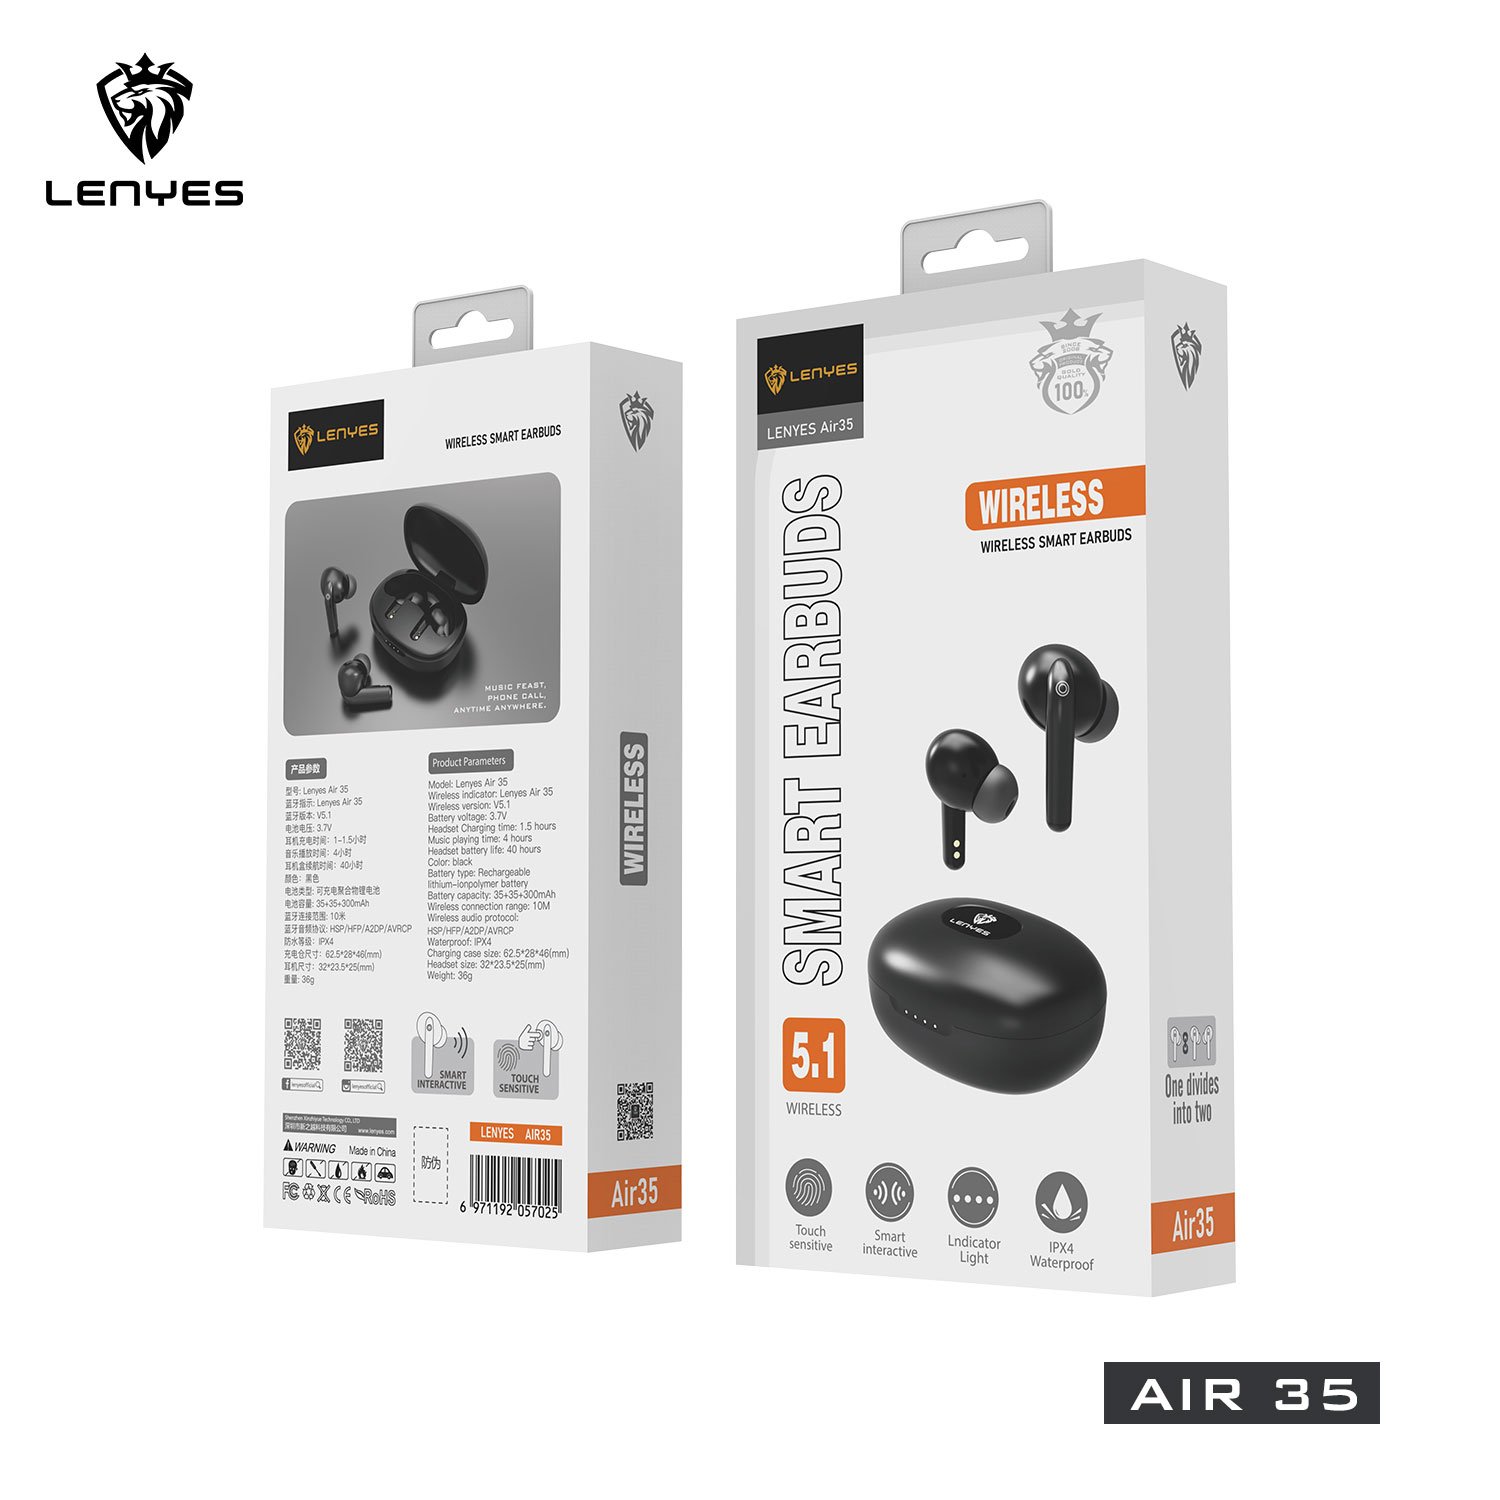 Lenyes AIR 35 Wireless Headset